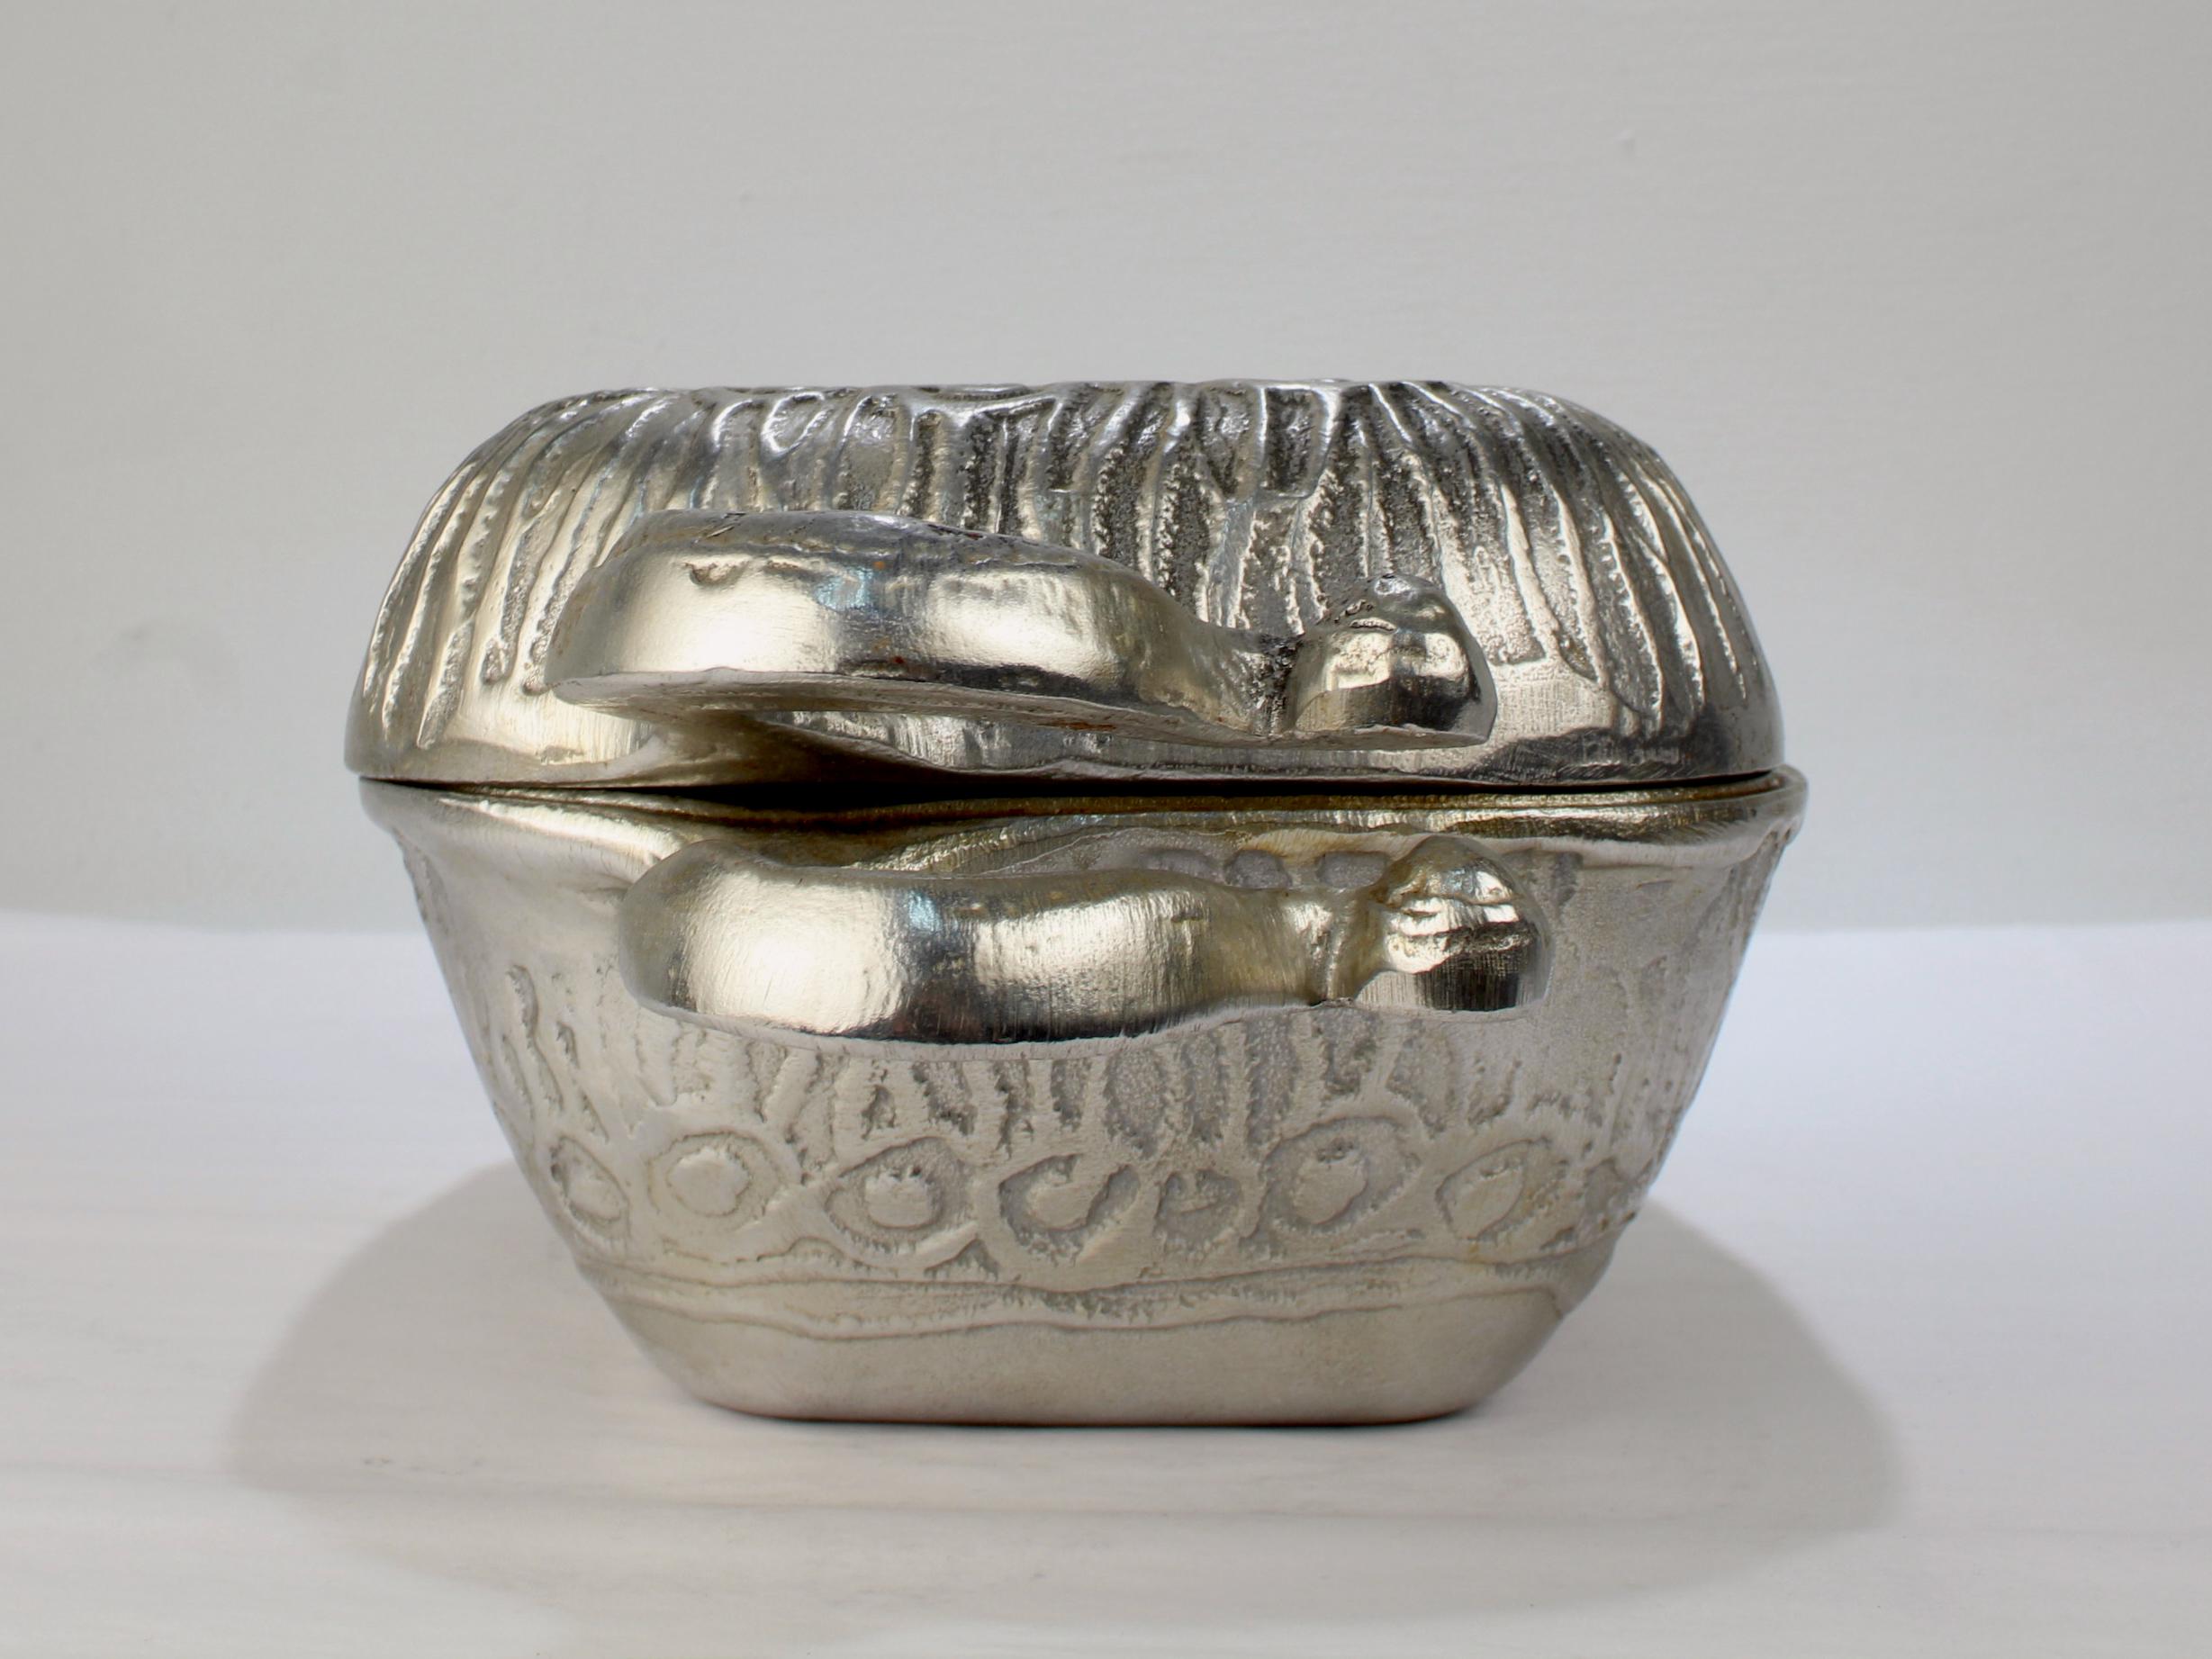 American Vintage Donald Drumm Mid-Century Modern Aluminum Covered Casserole Dish / Tureen For Sale